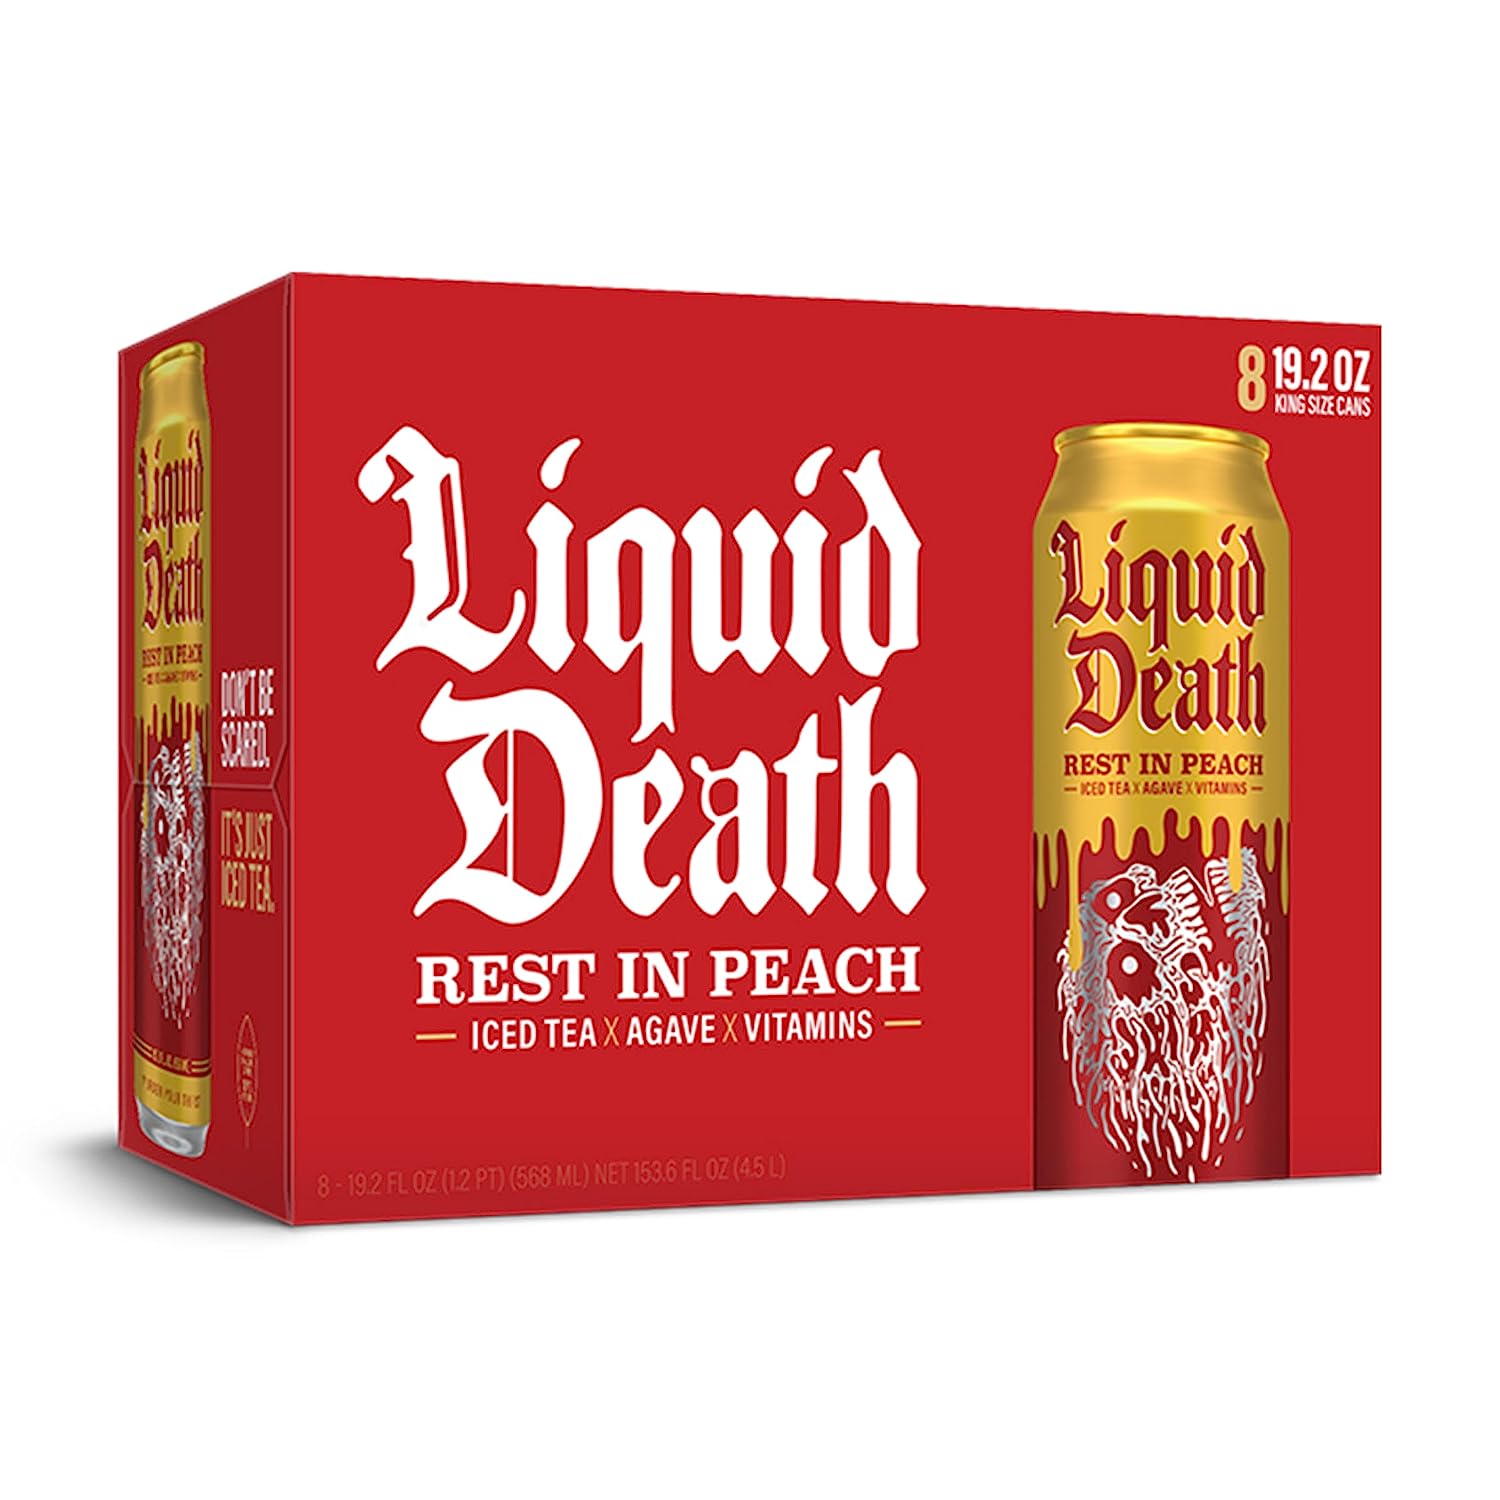 Wholesale prices with free shipping all over United States Liquid Death Iced Black Tea, Rest in Peach 19.2 oz King Size Cans (8-Pack) - Steven Deals